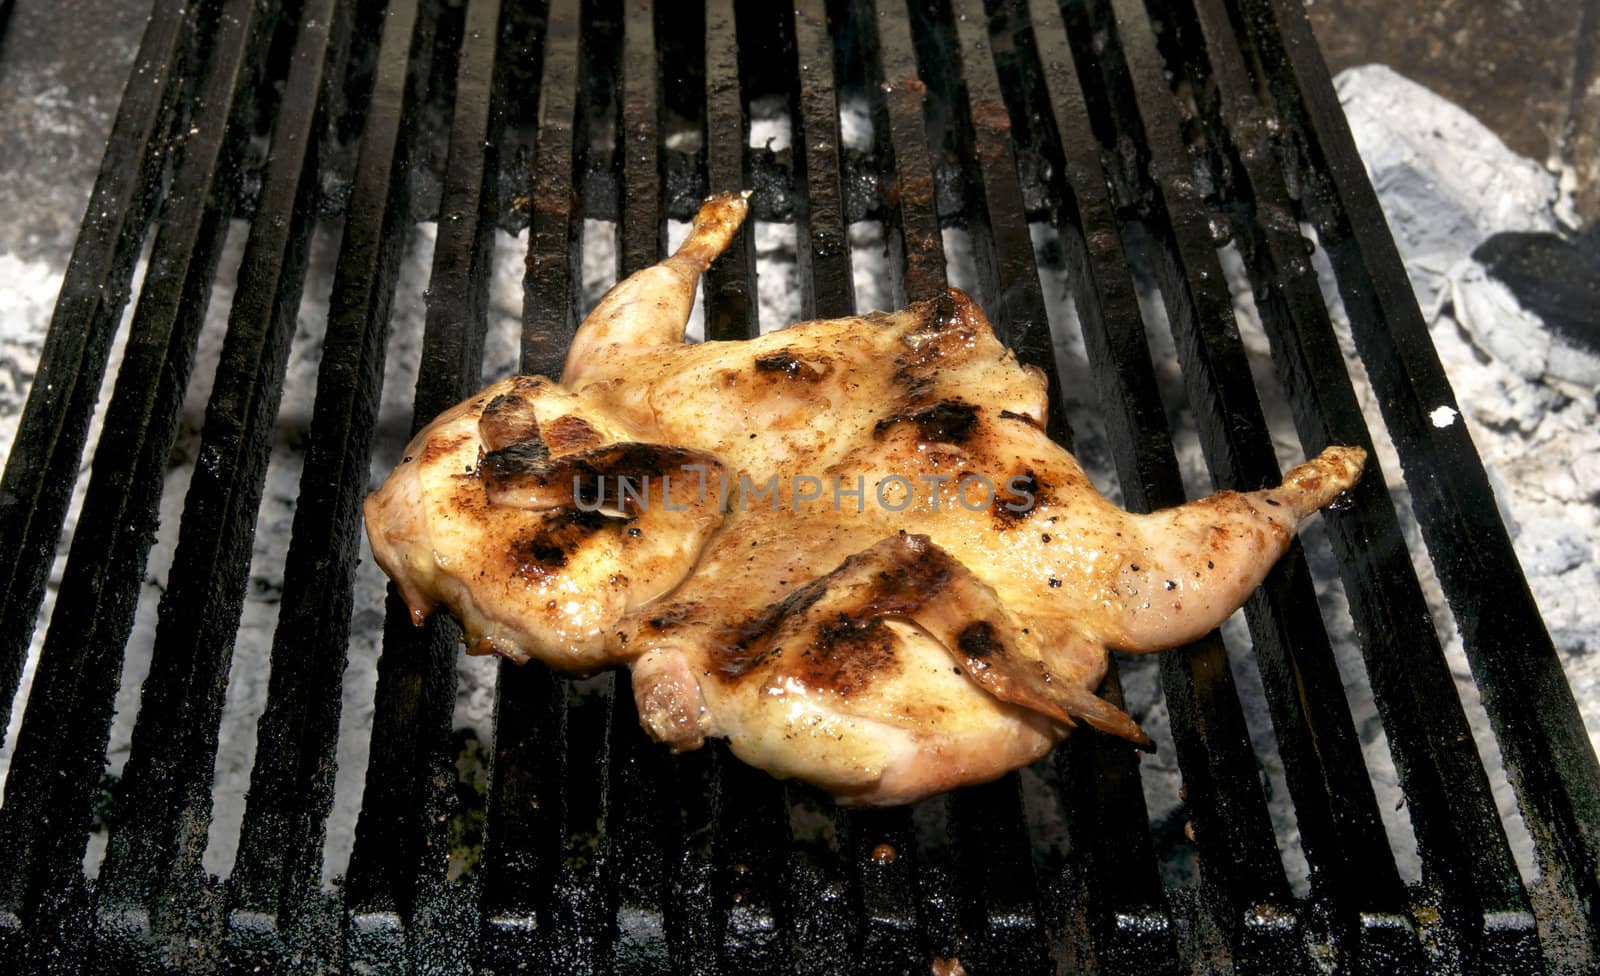 preparation of quail on the grill by Lester120